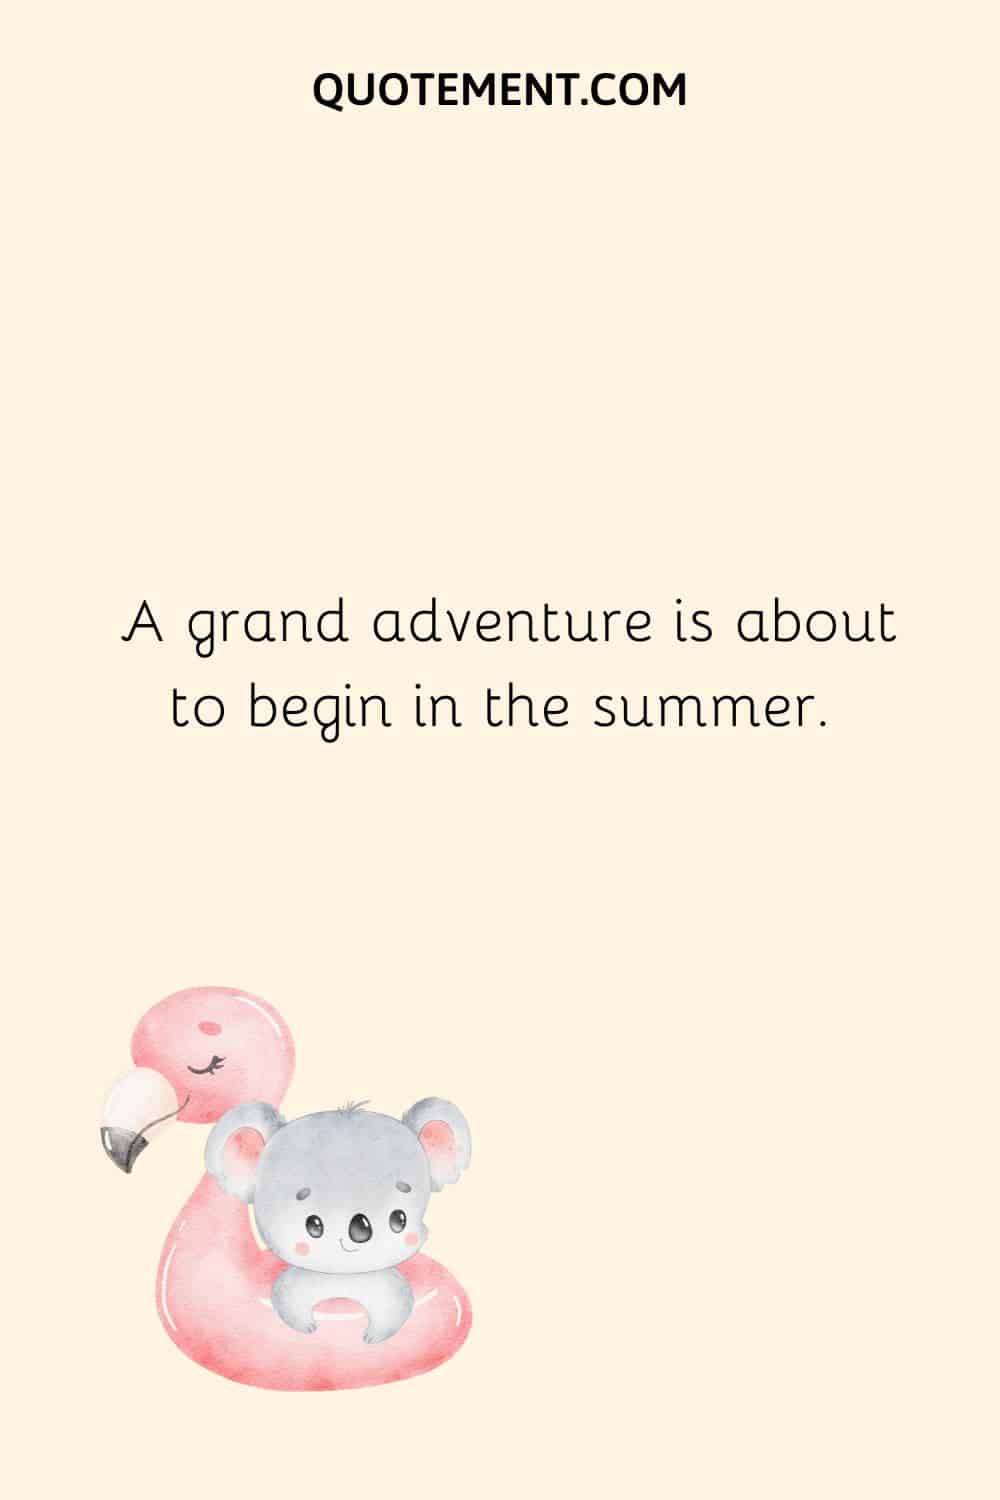 A grand adventure is about to begin in the summer